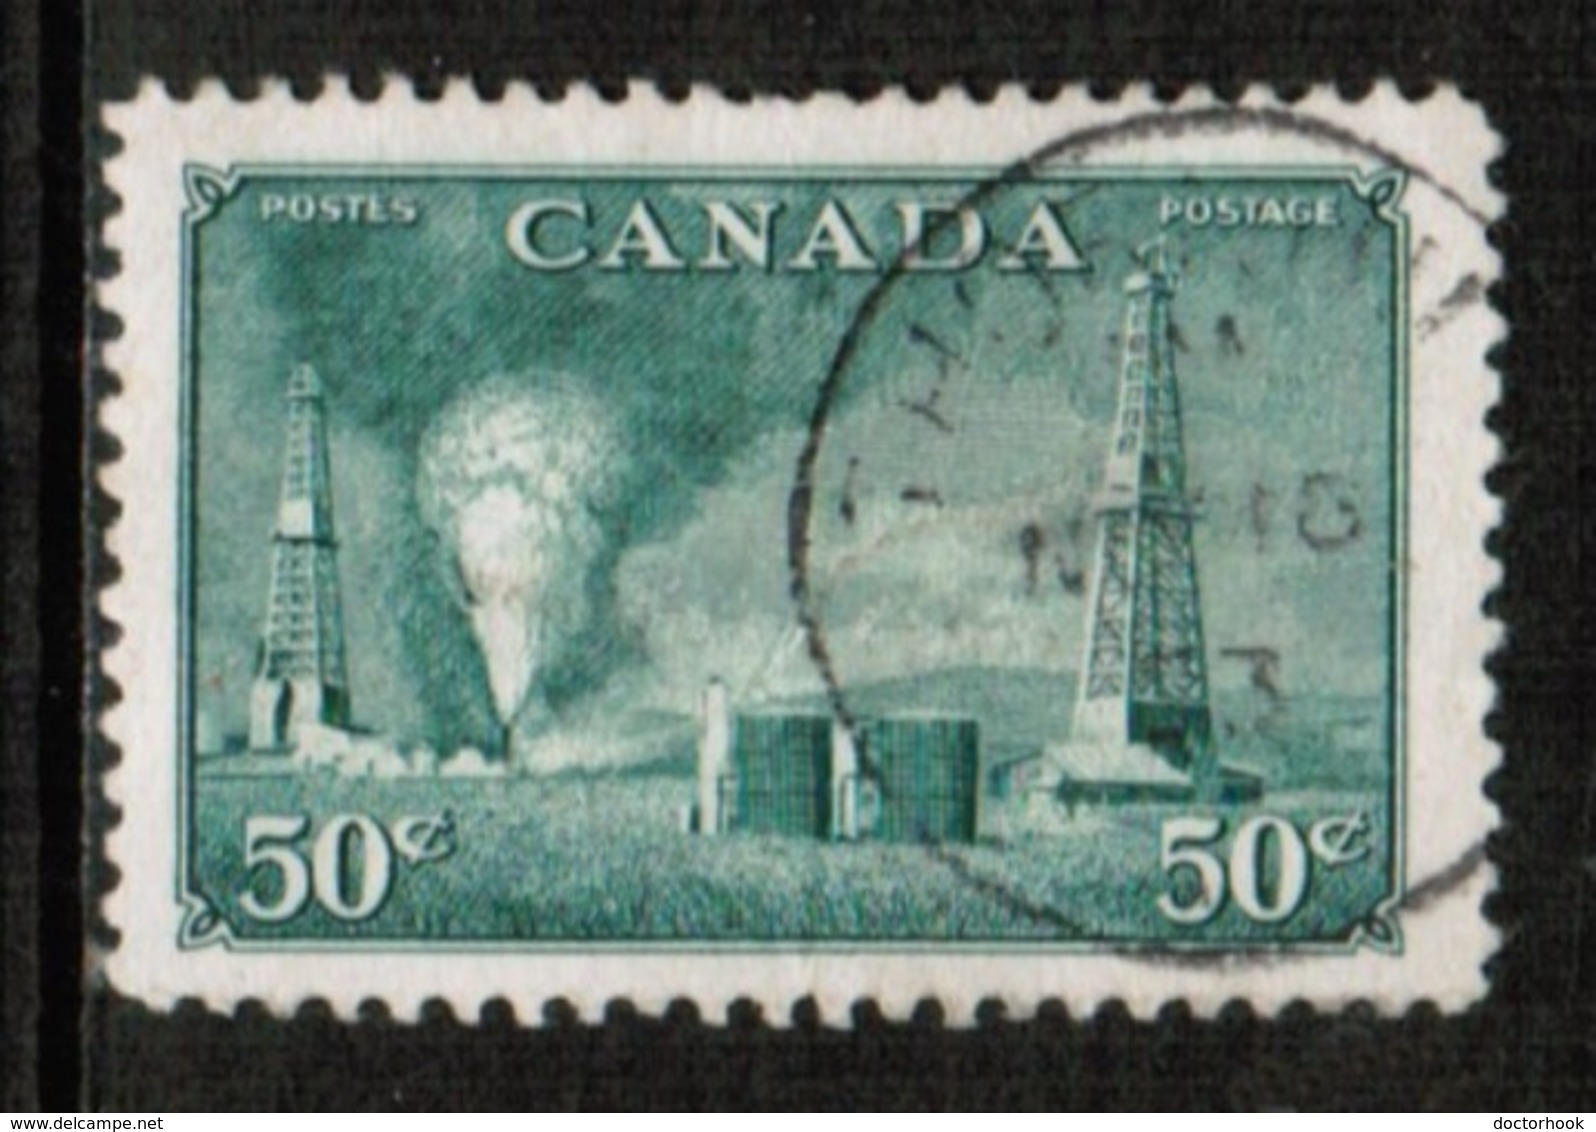 CANADA  Scott # 294 VF USED (Stamp Scan # 533) - Used Stamps